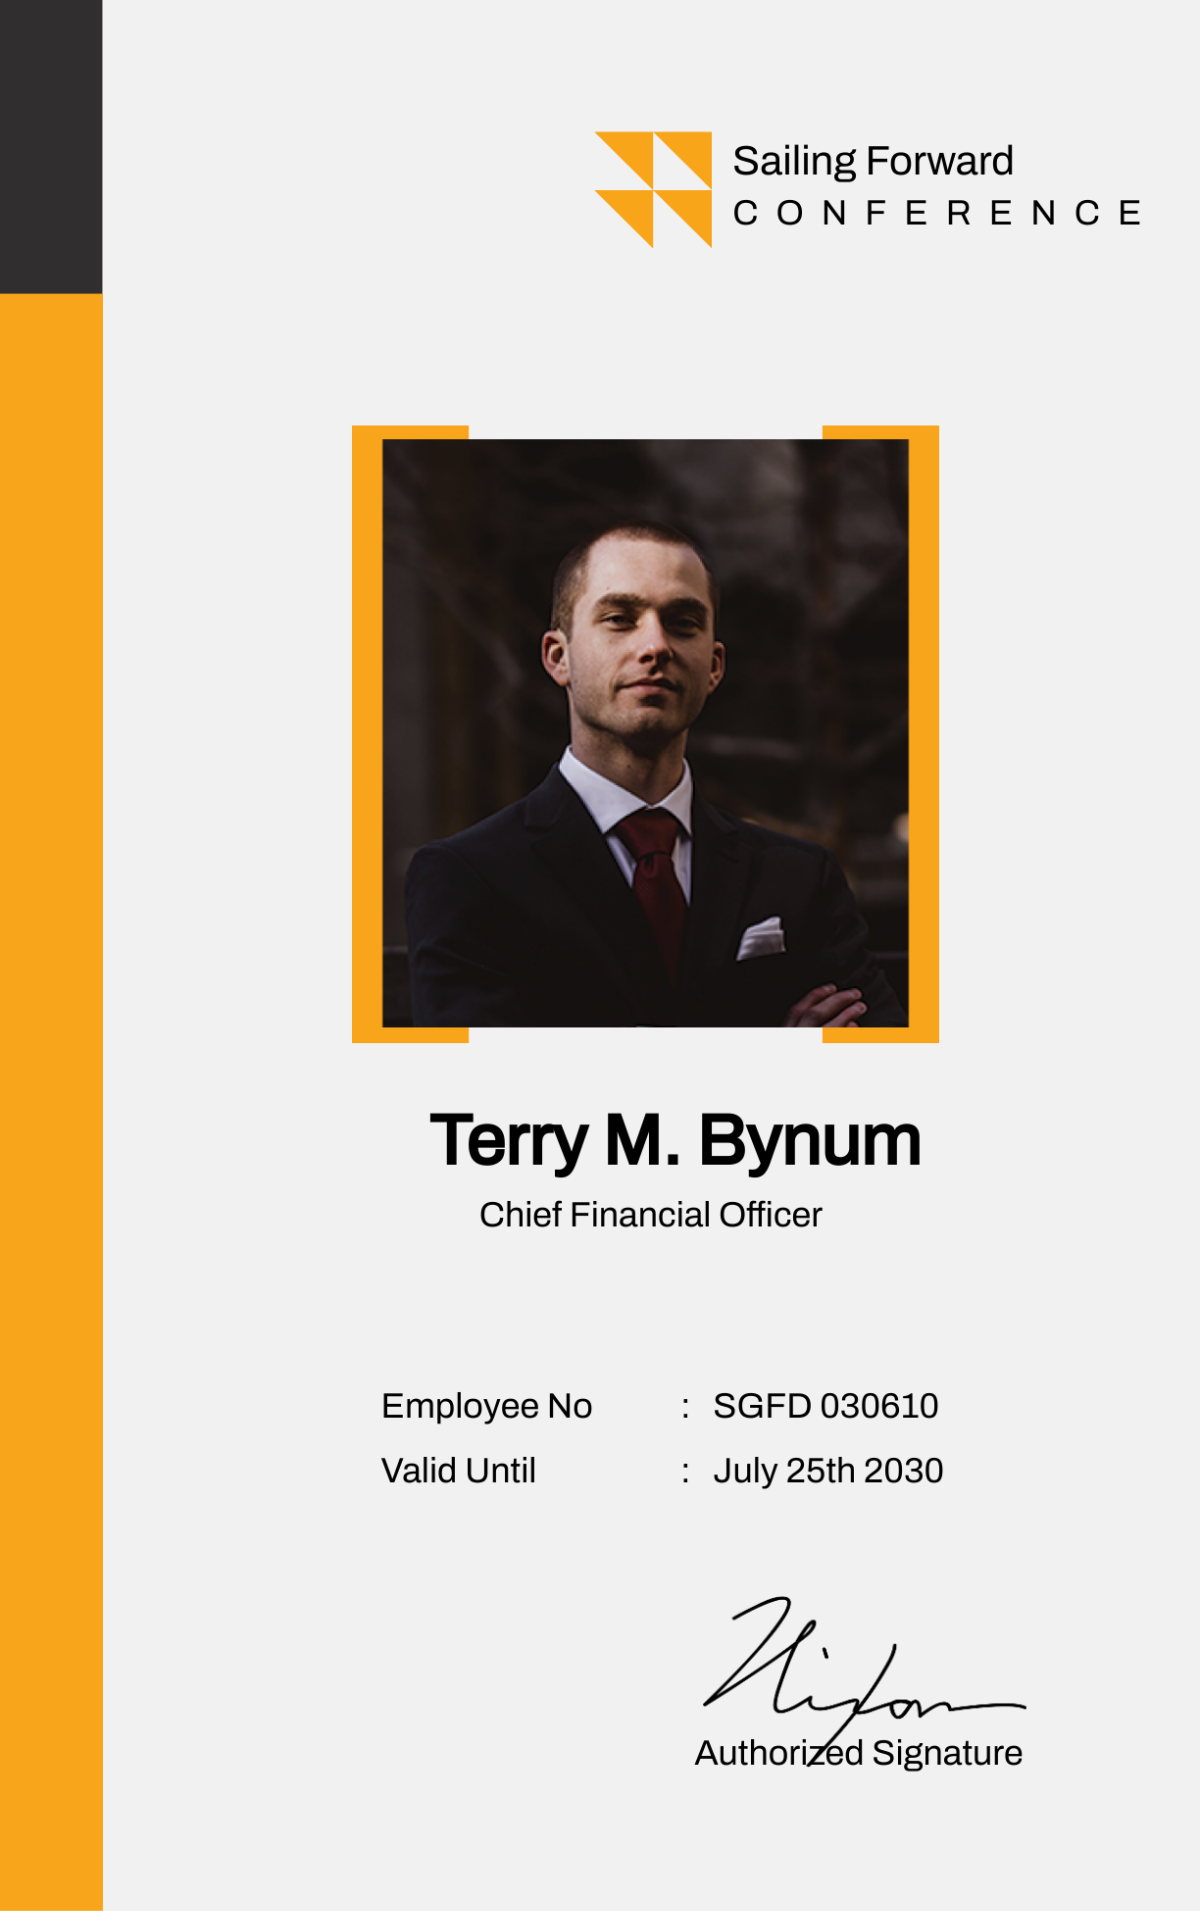 Conference ID Card Template